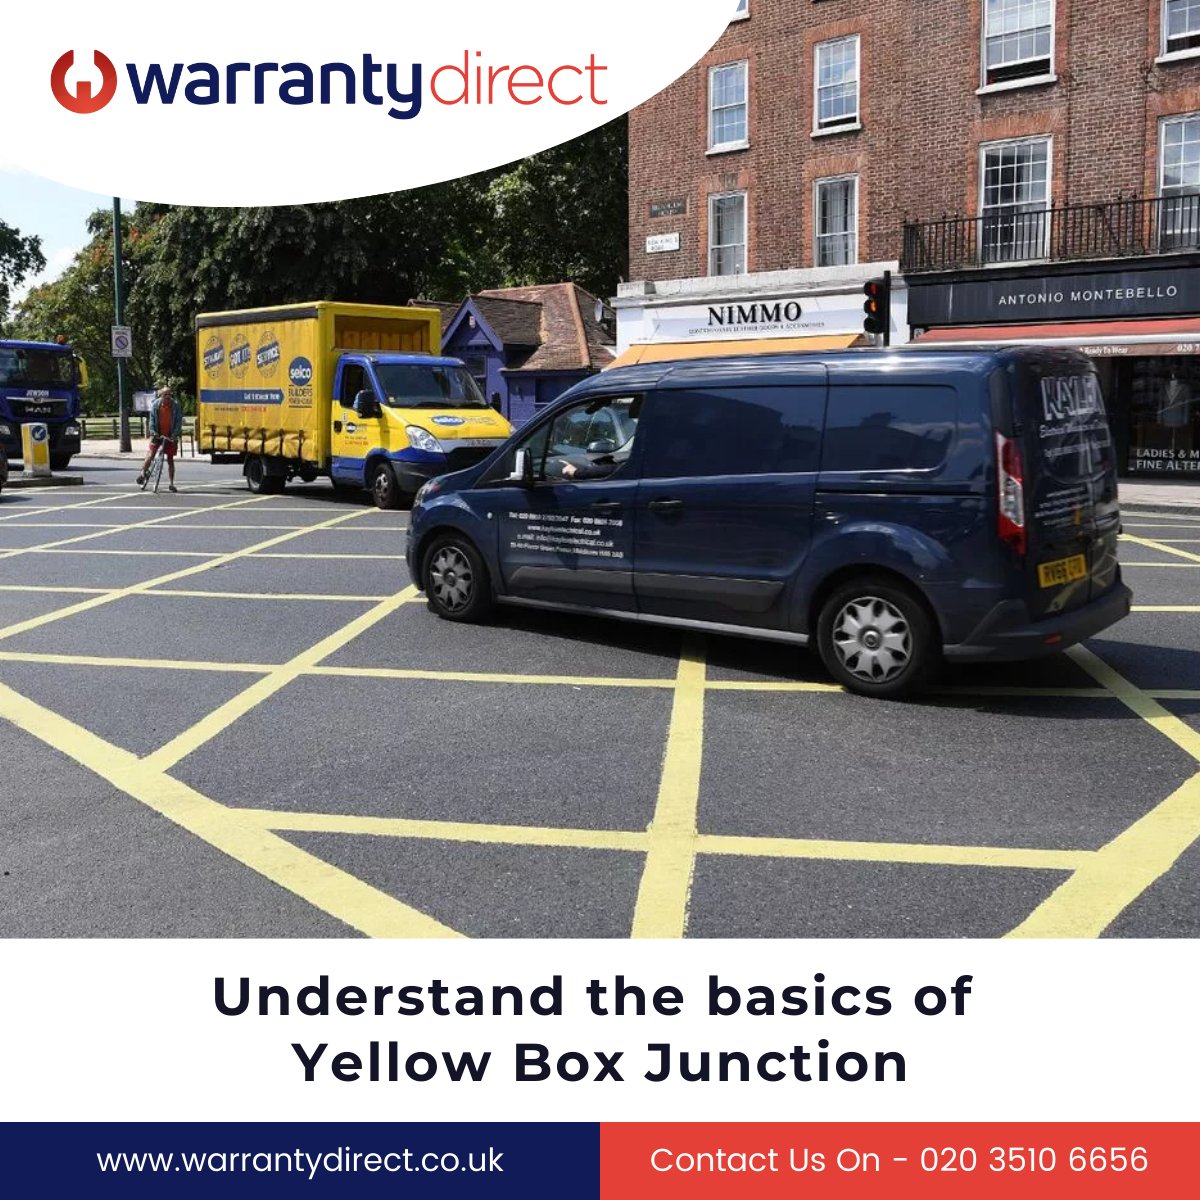 Yellow box junctions can be tricky to navigate, but with the right knowledge, you can avoid traffic jams and fines. zurl.co/aiuj #warrantydirect #carwarranty #yellowboxjunction #boxjunction  #warranty #vehiclewarranty #uk #usedcar #cars #usedcarwarranty